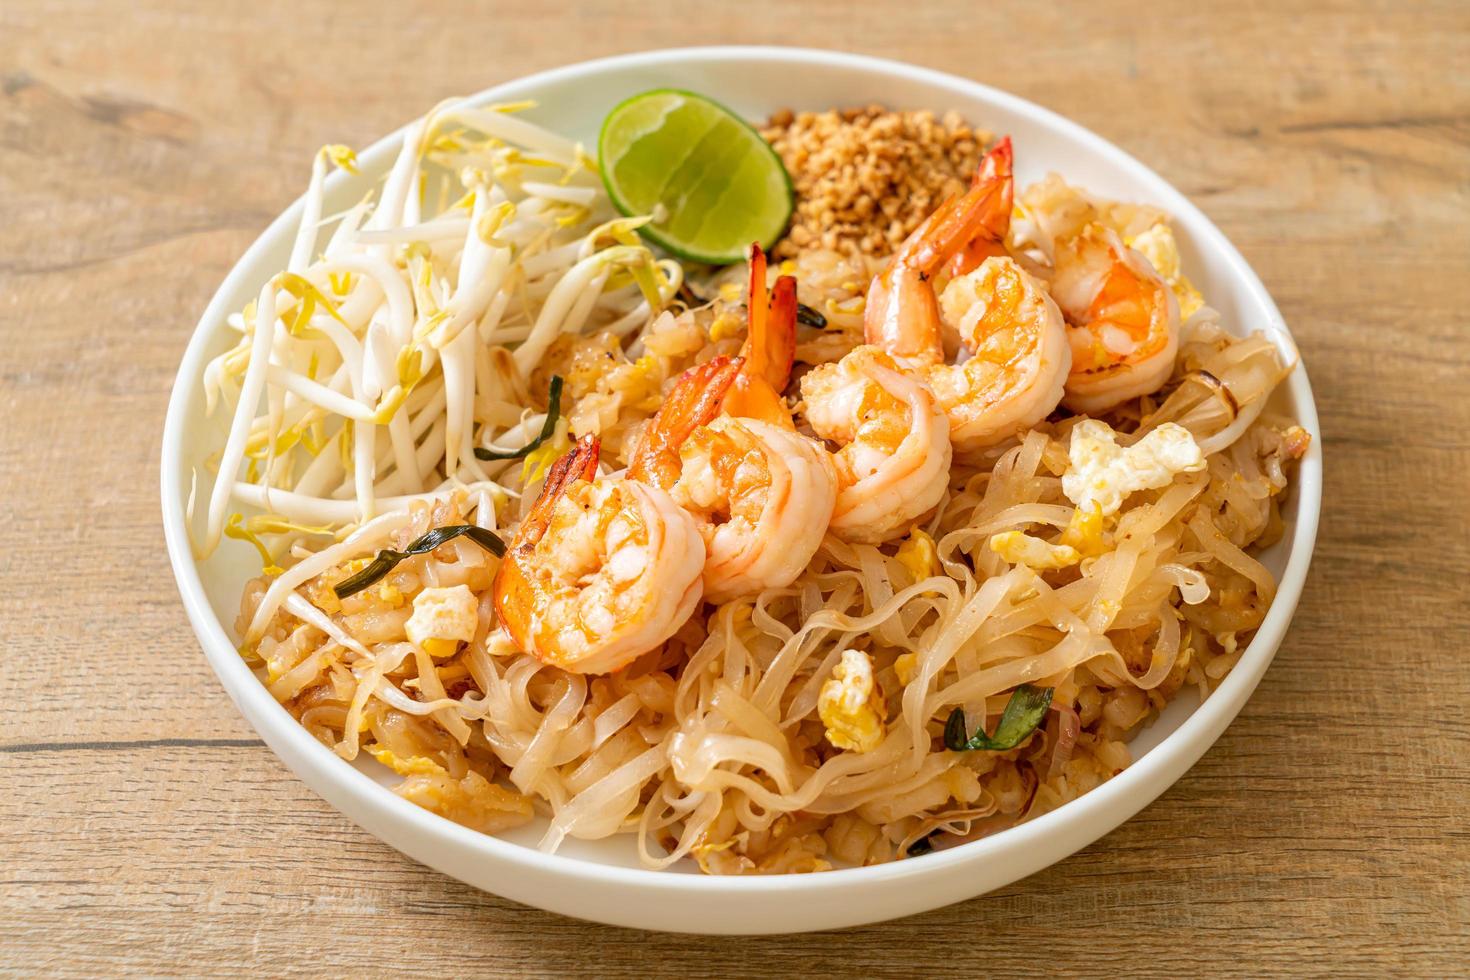 Stir-fried noodles with shrimp and sprouts or Pad Thai - Asian food style photo